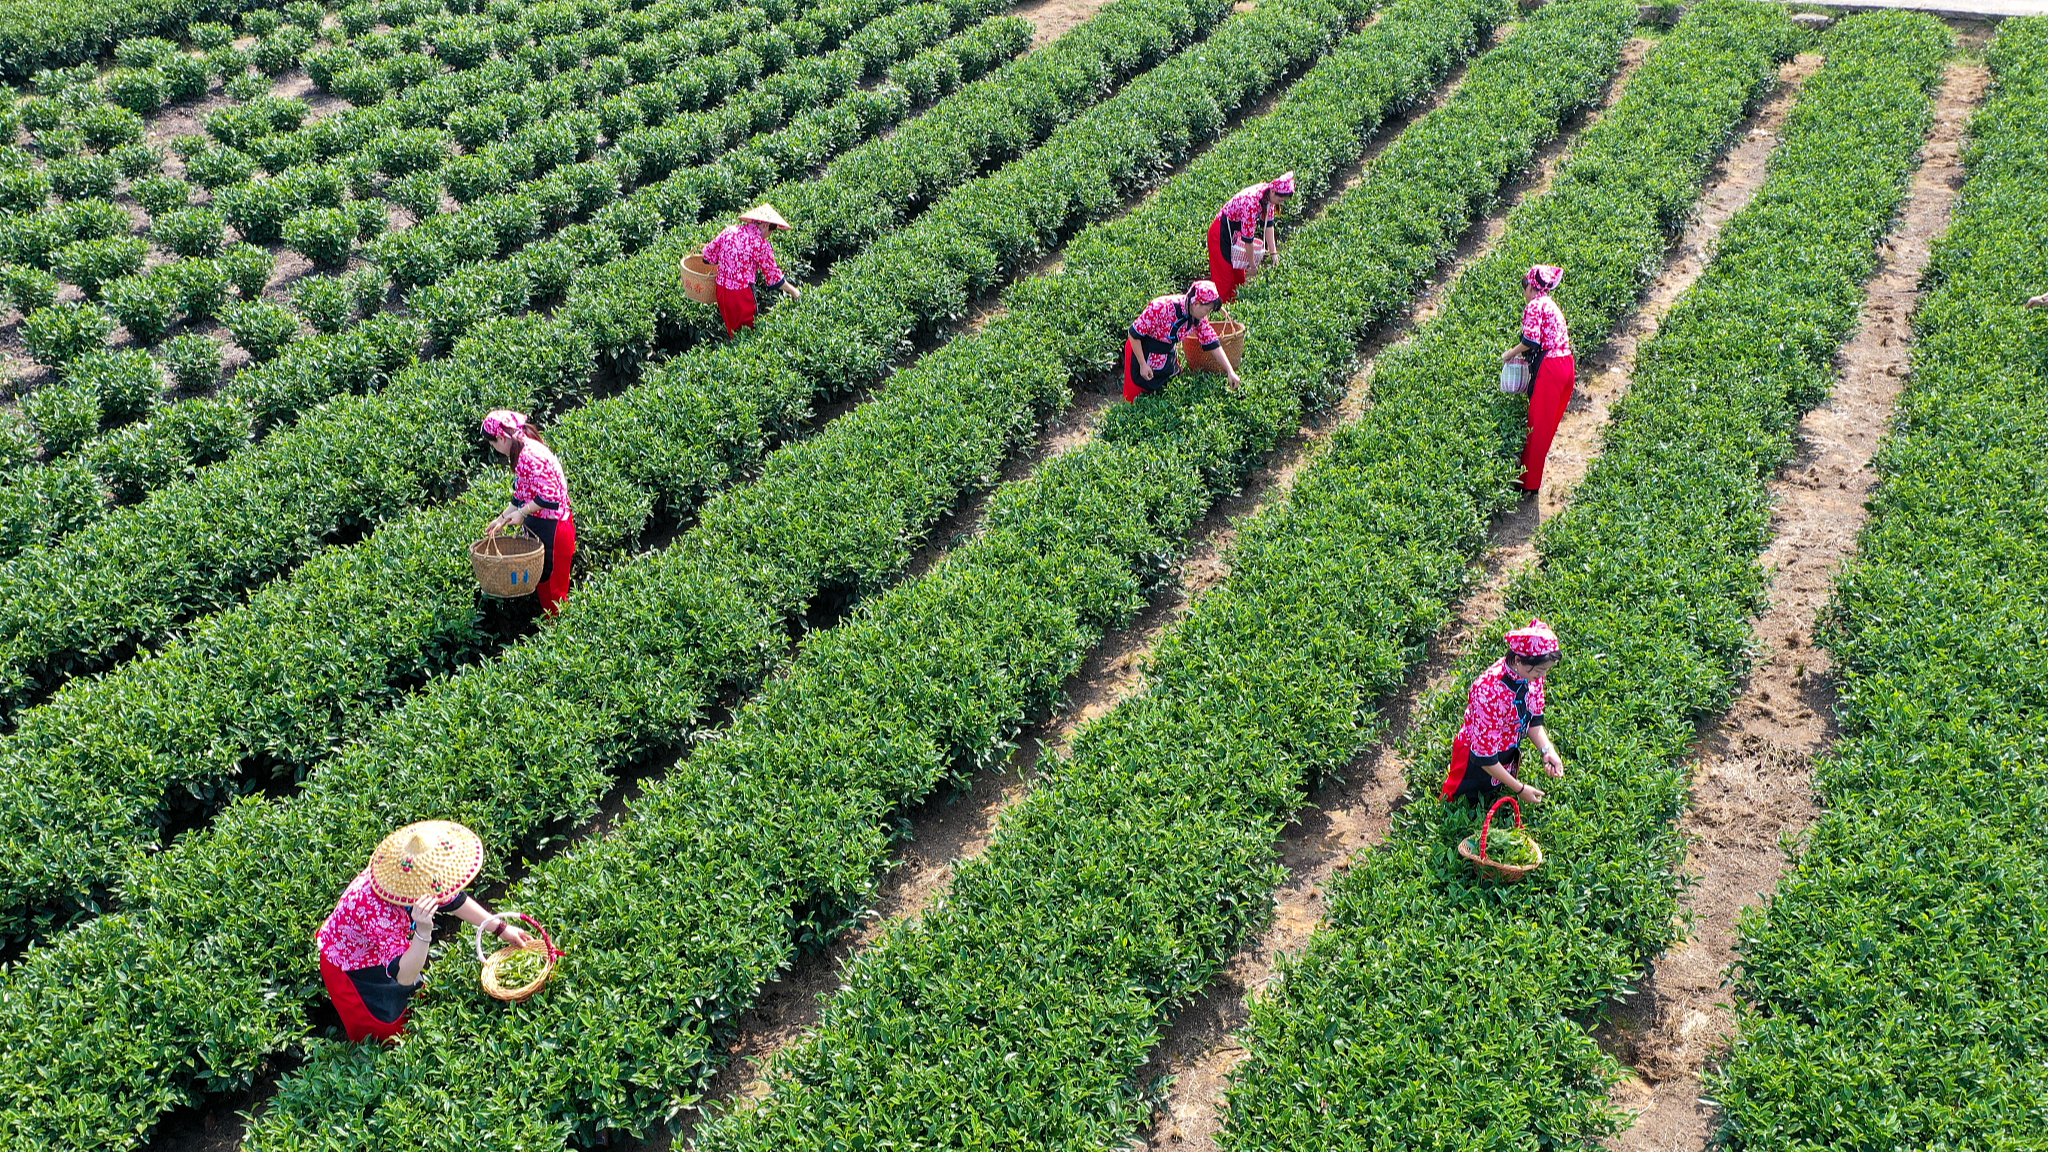 Farmers are pictured picking tea leaves in Fuding City, Fujian Province, on September 9, 2022. /CFP